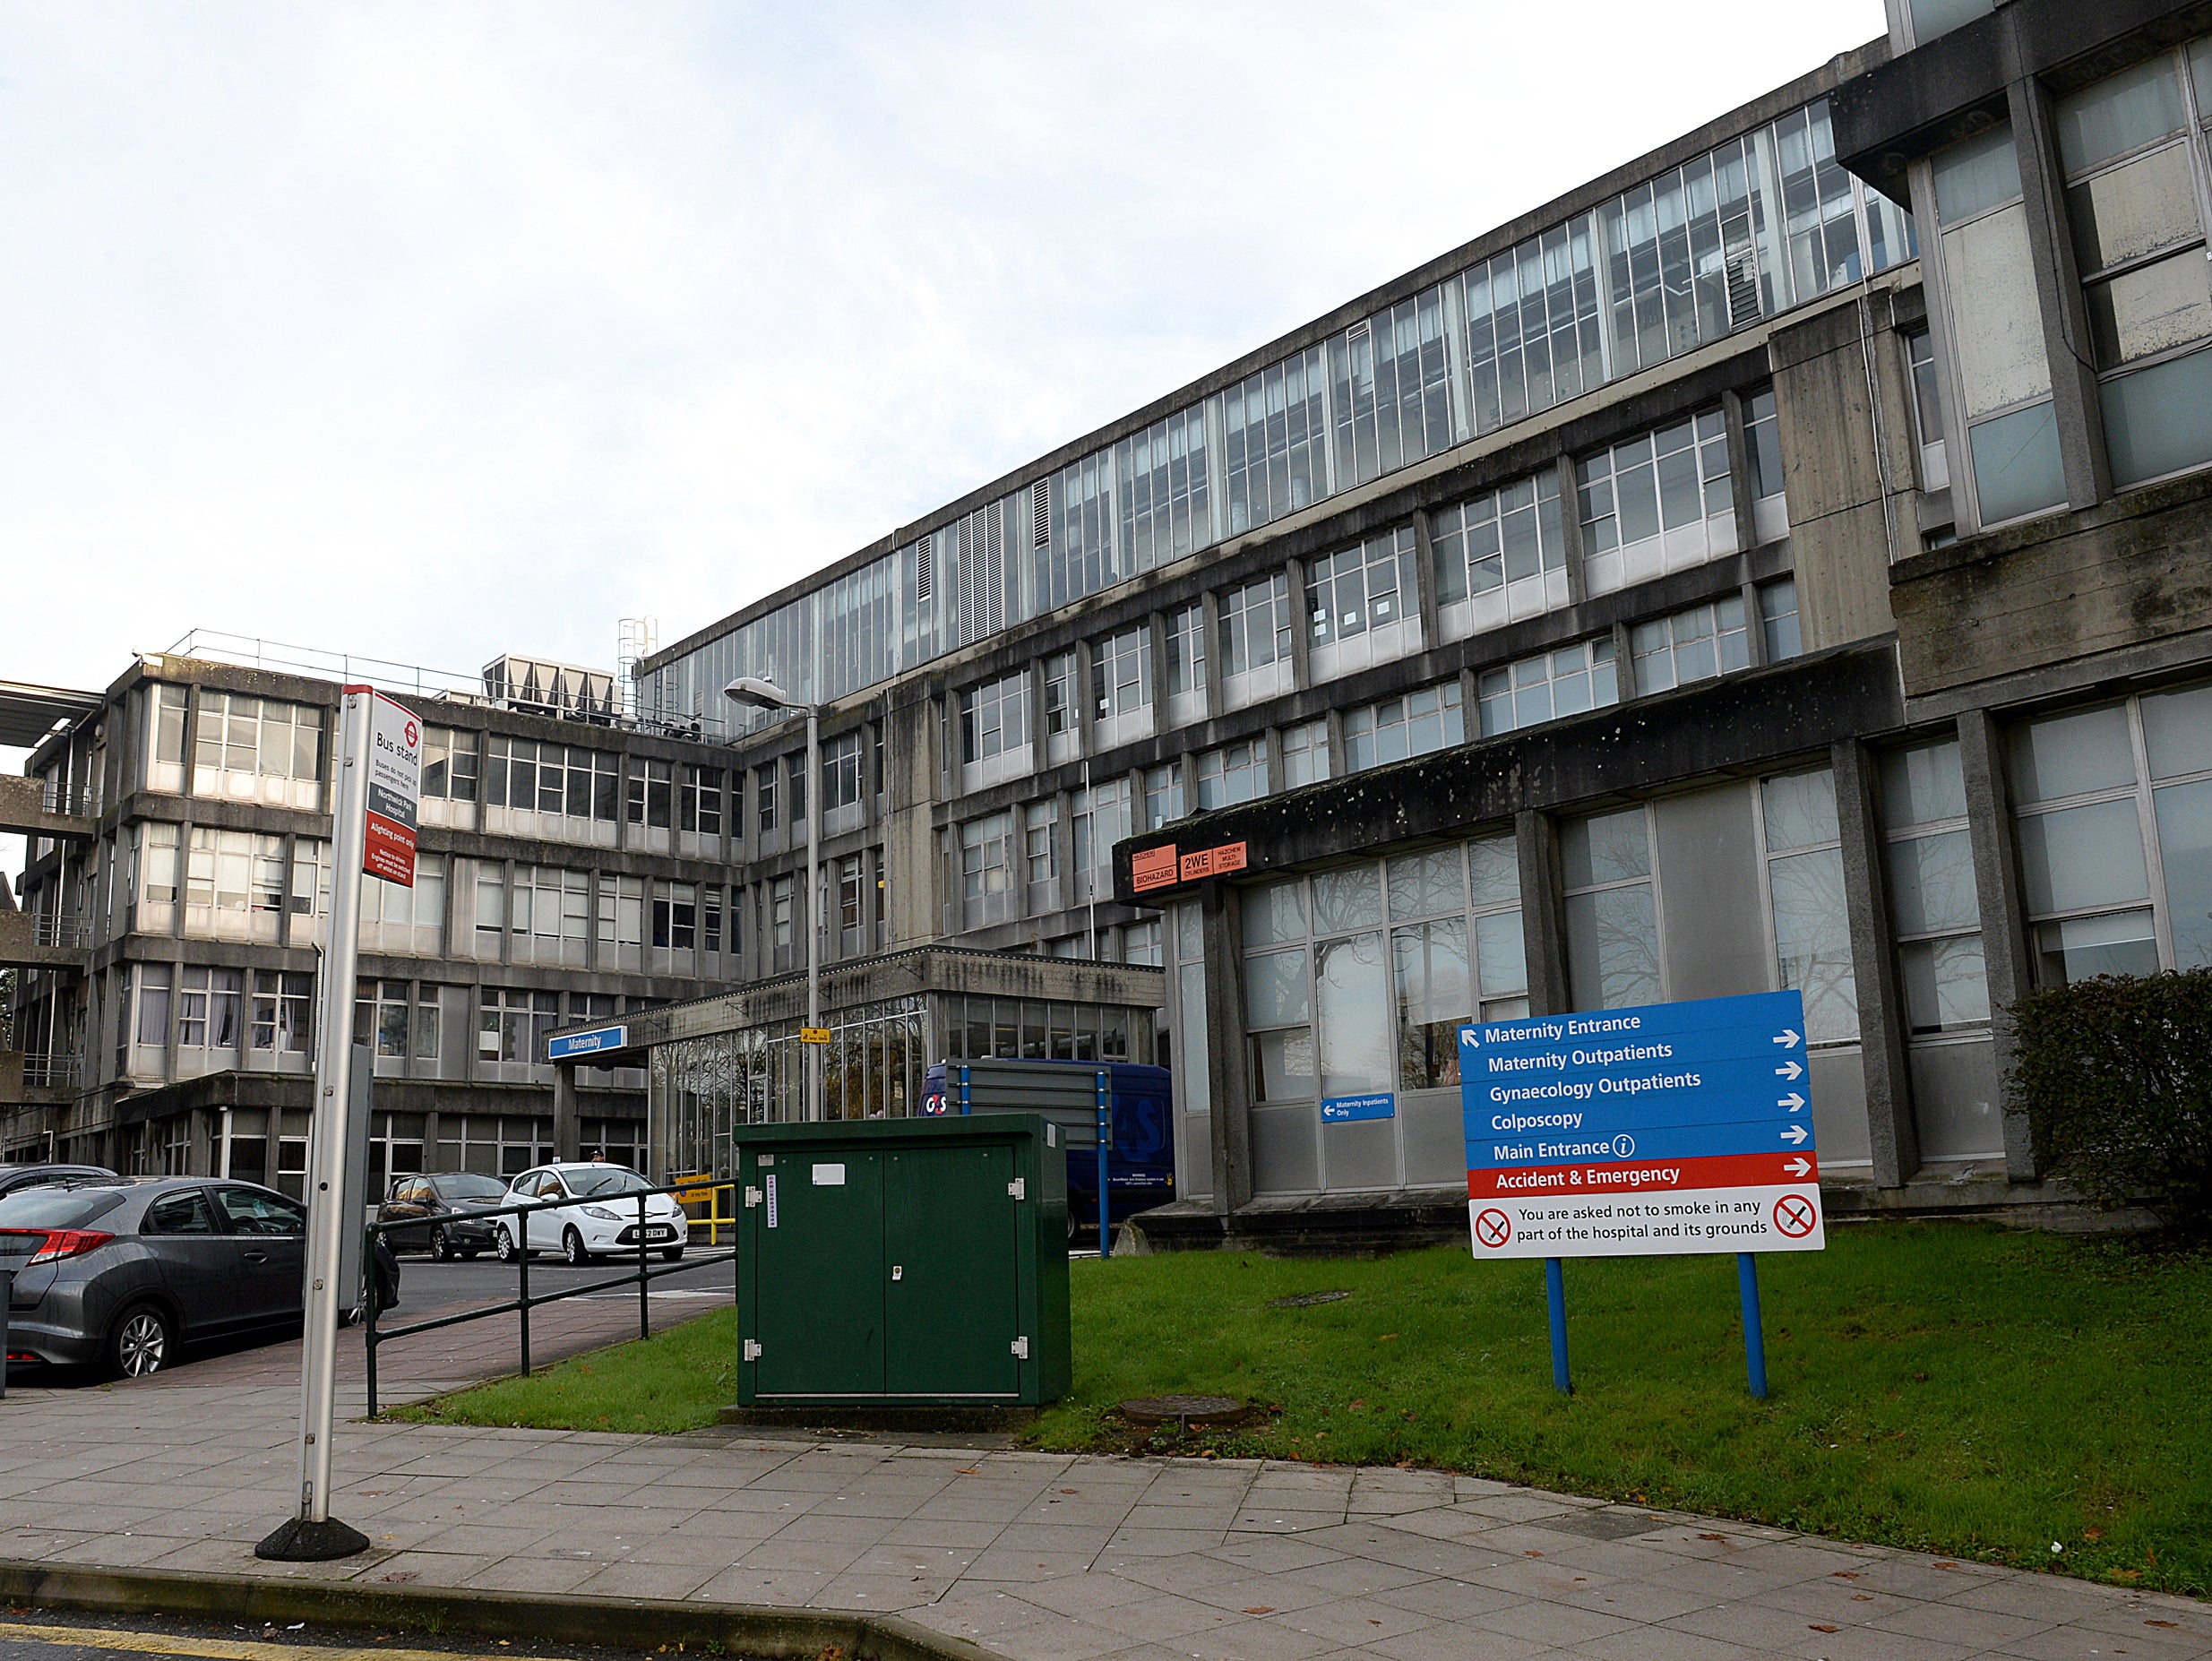 Maternity services at Northwick Park Hospital in north London has been criticised by the CQC